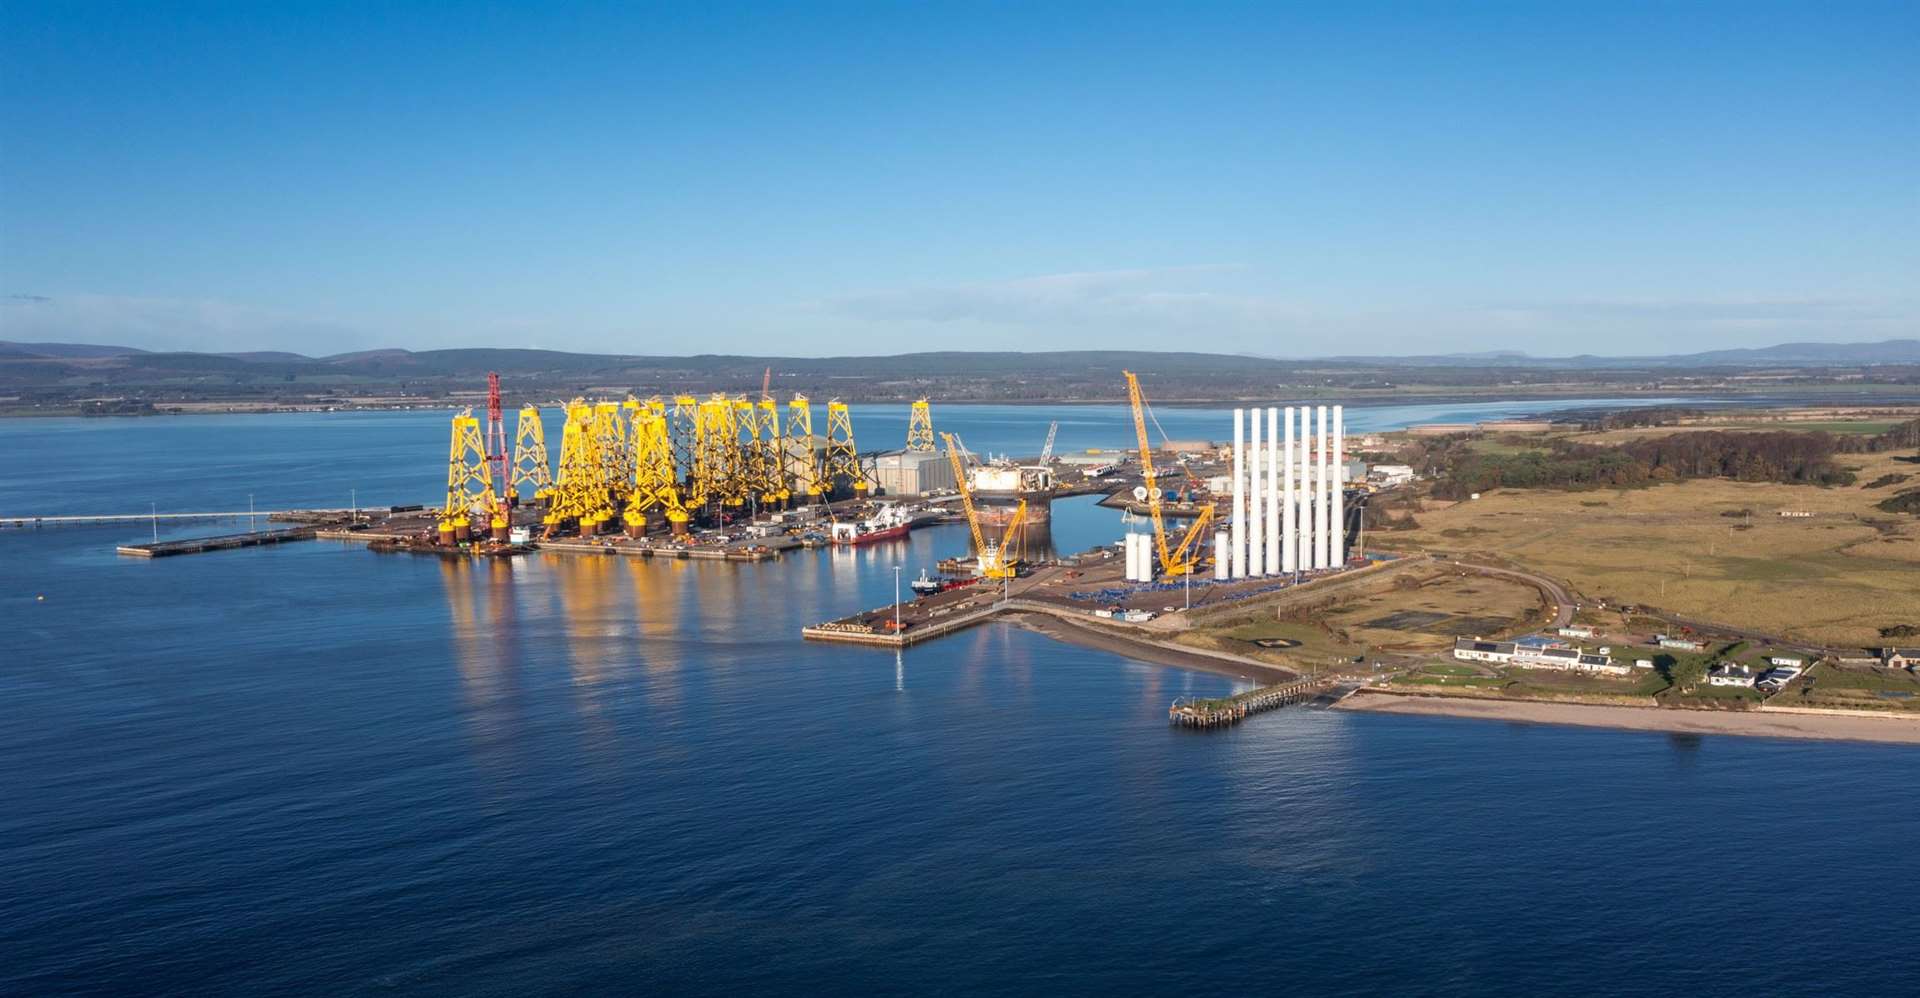 The Inverness and Cromarty Firth Green Freeport could be a multi-generational game changer.